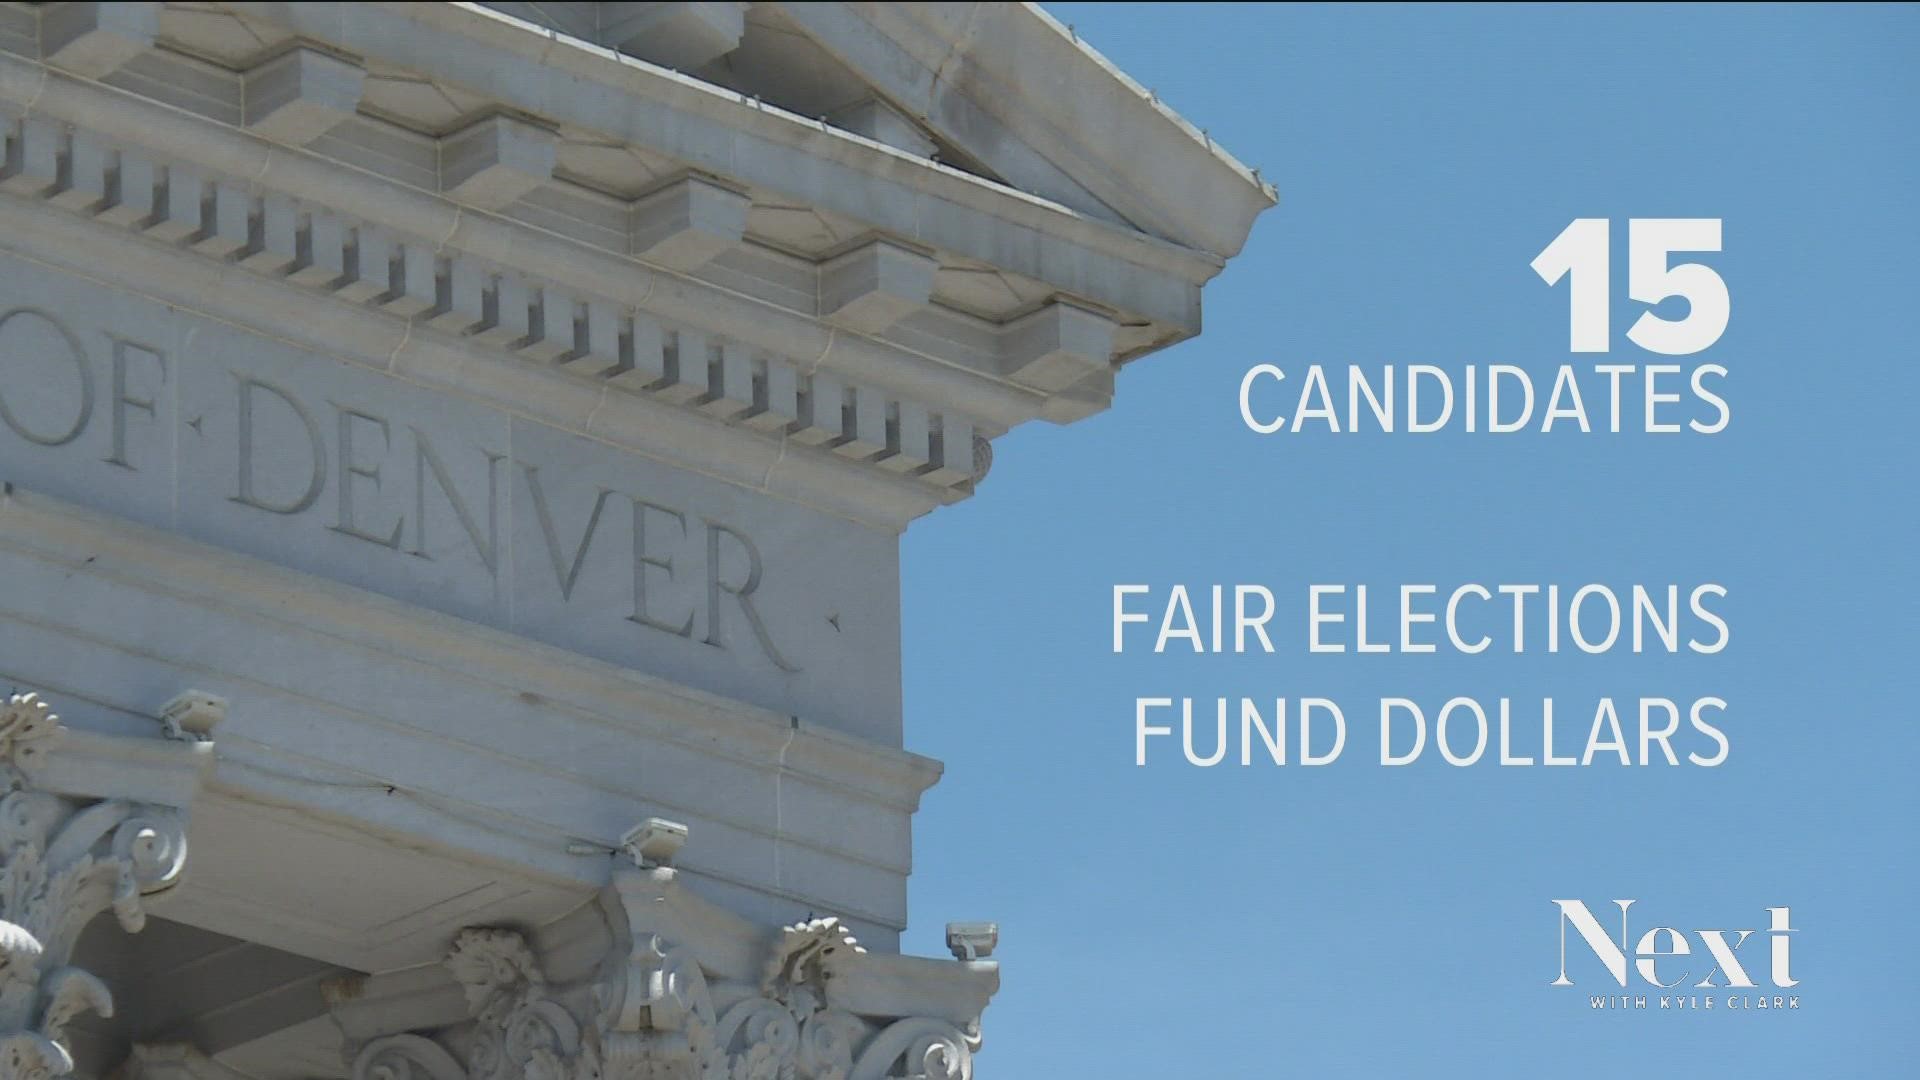 70% of voters agreed to the Fair Election Fund in 2018. Now, almost a million dollars of taxpayer money is being divided between candidates.